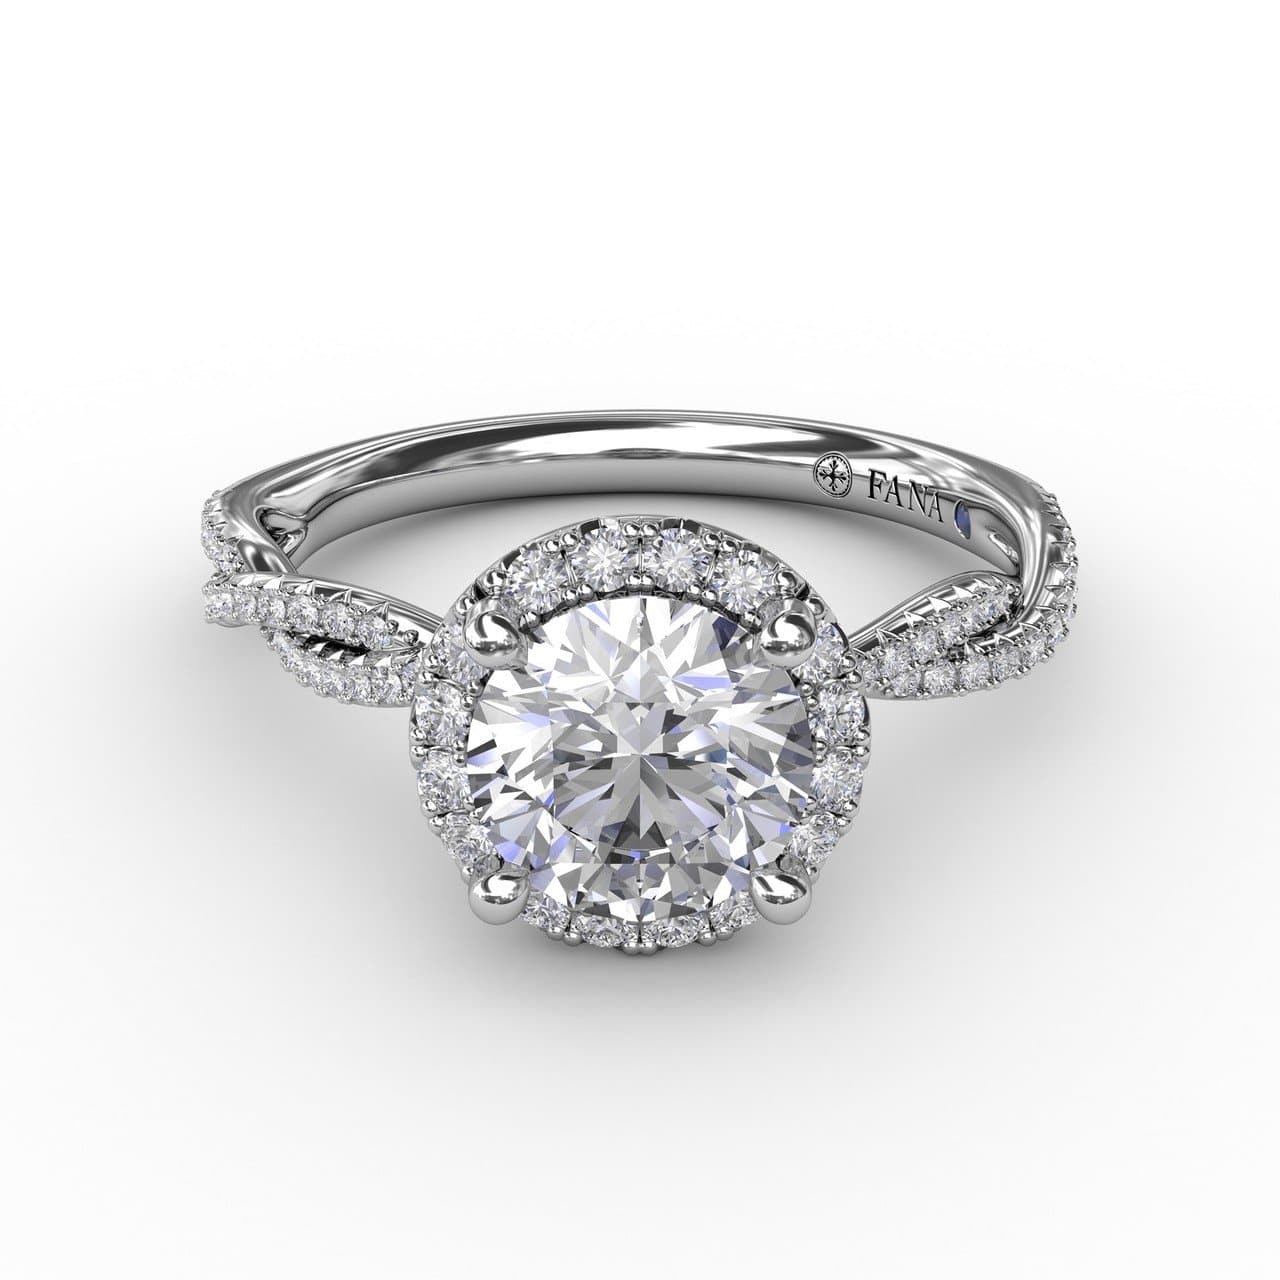 Round Brilliant Cut Halo Diamond Engagement Ring, Bezel Set Centre in a  Rolled Bead Set Halo on Straight Flat Band with Open Undersetting.